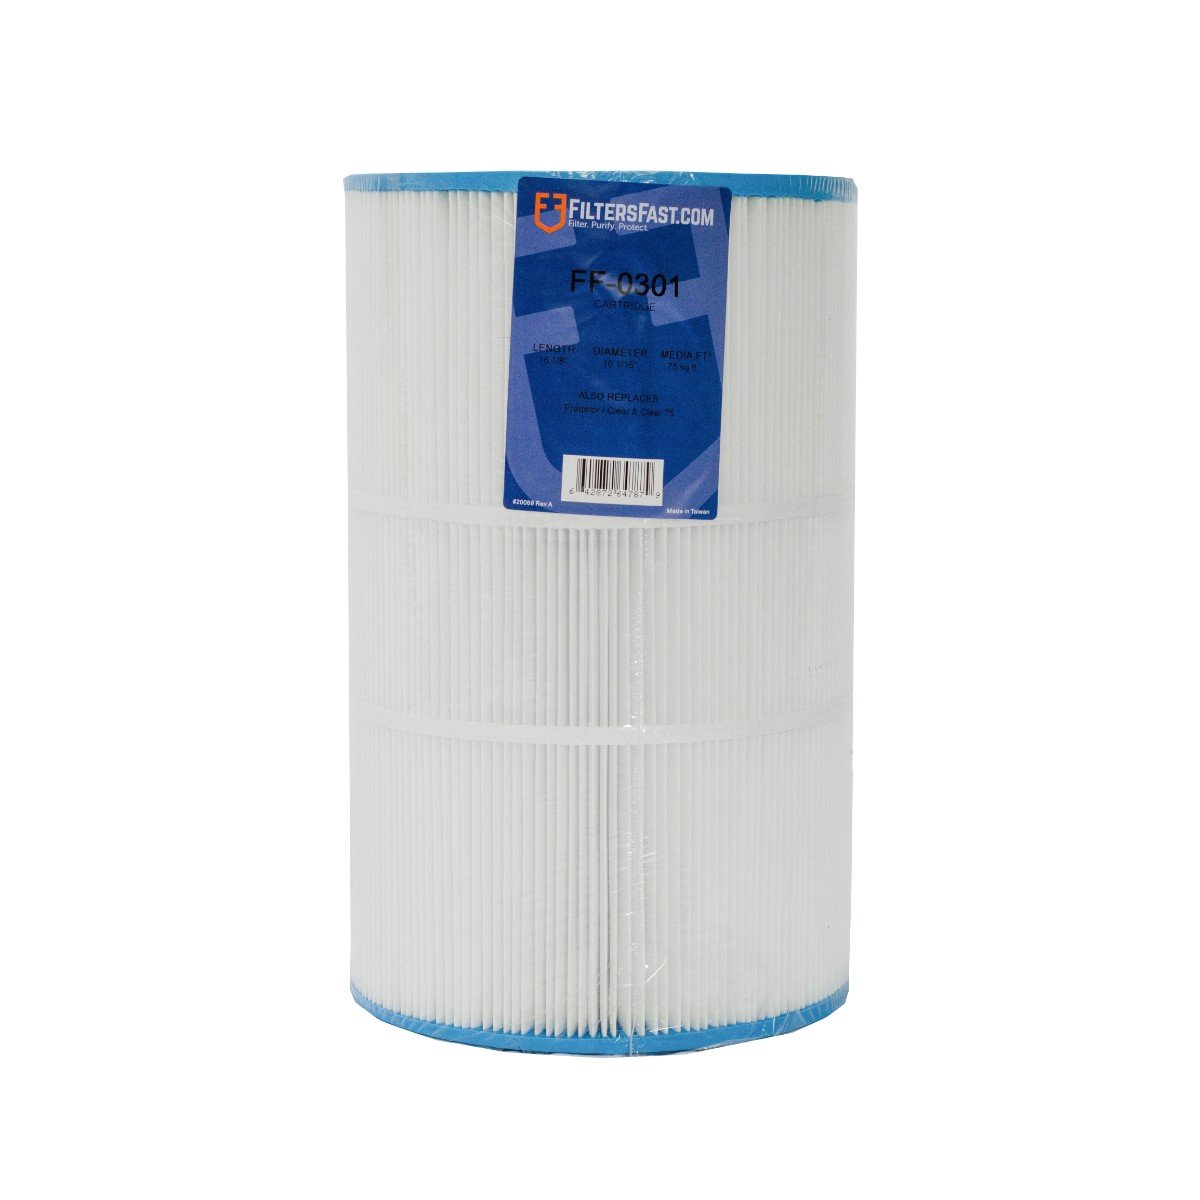 17525 Filters Fast® FF-0301 Replacement for Aladdin 17525